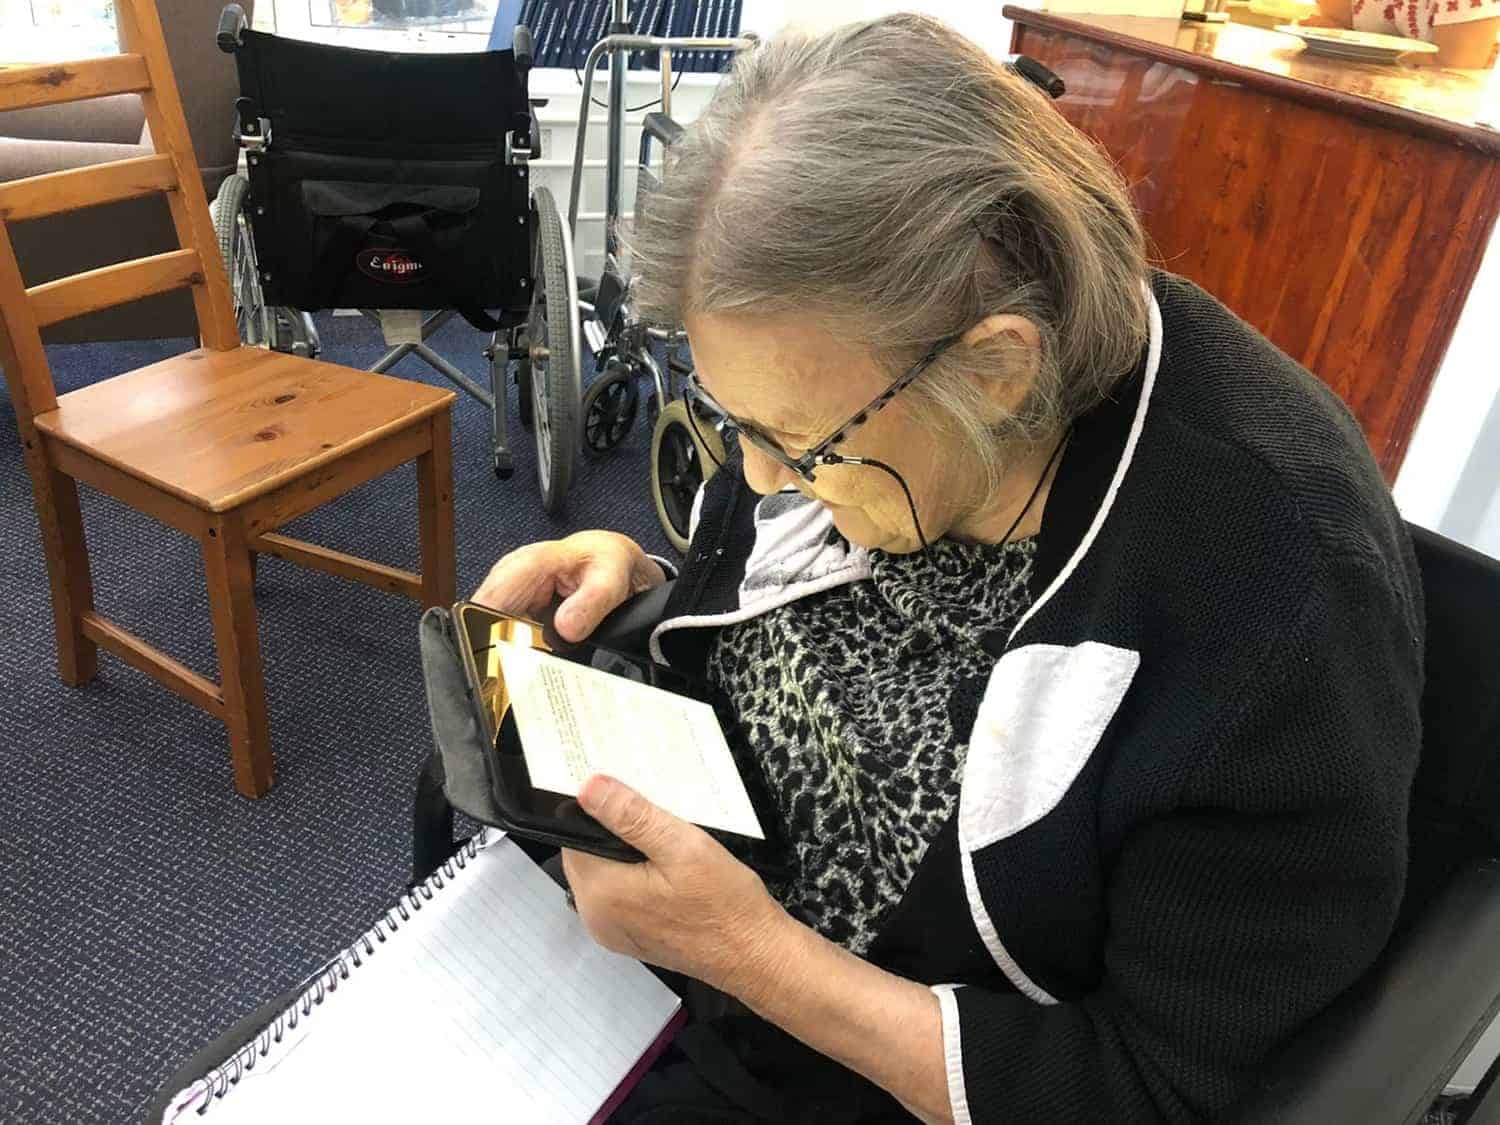 An elderly woman with glasses is engaged in examining artwork content on a smartphone, seated next to a notebook and a wheelchair in an art gallery setting.